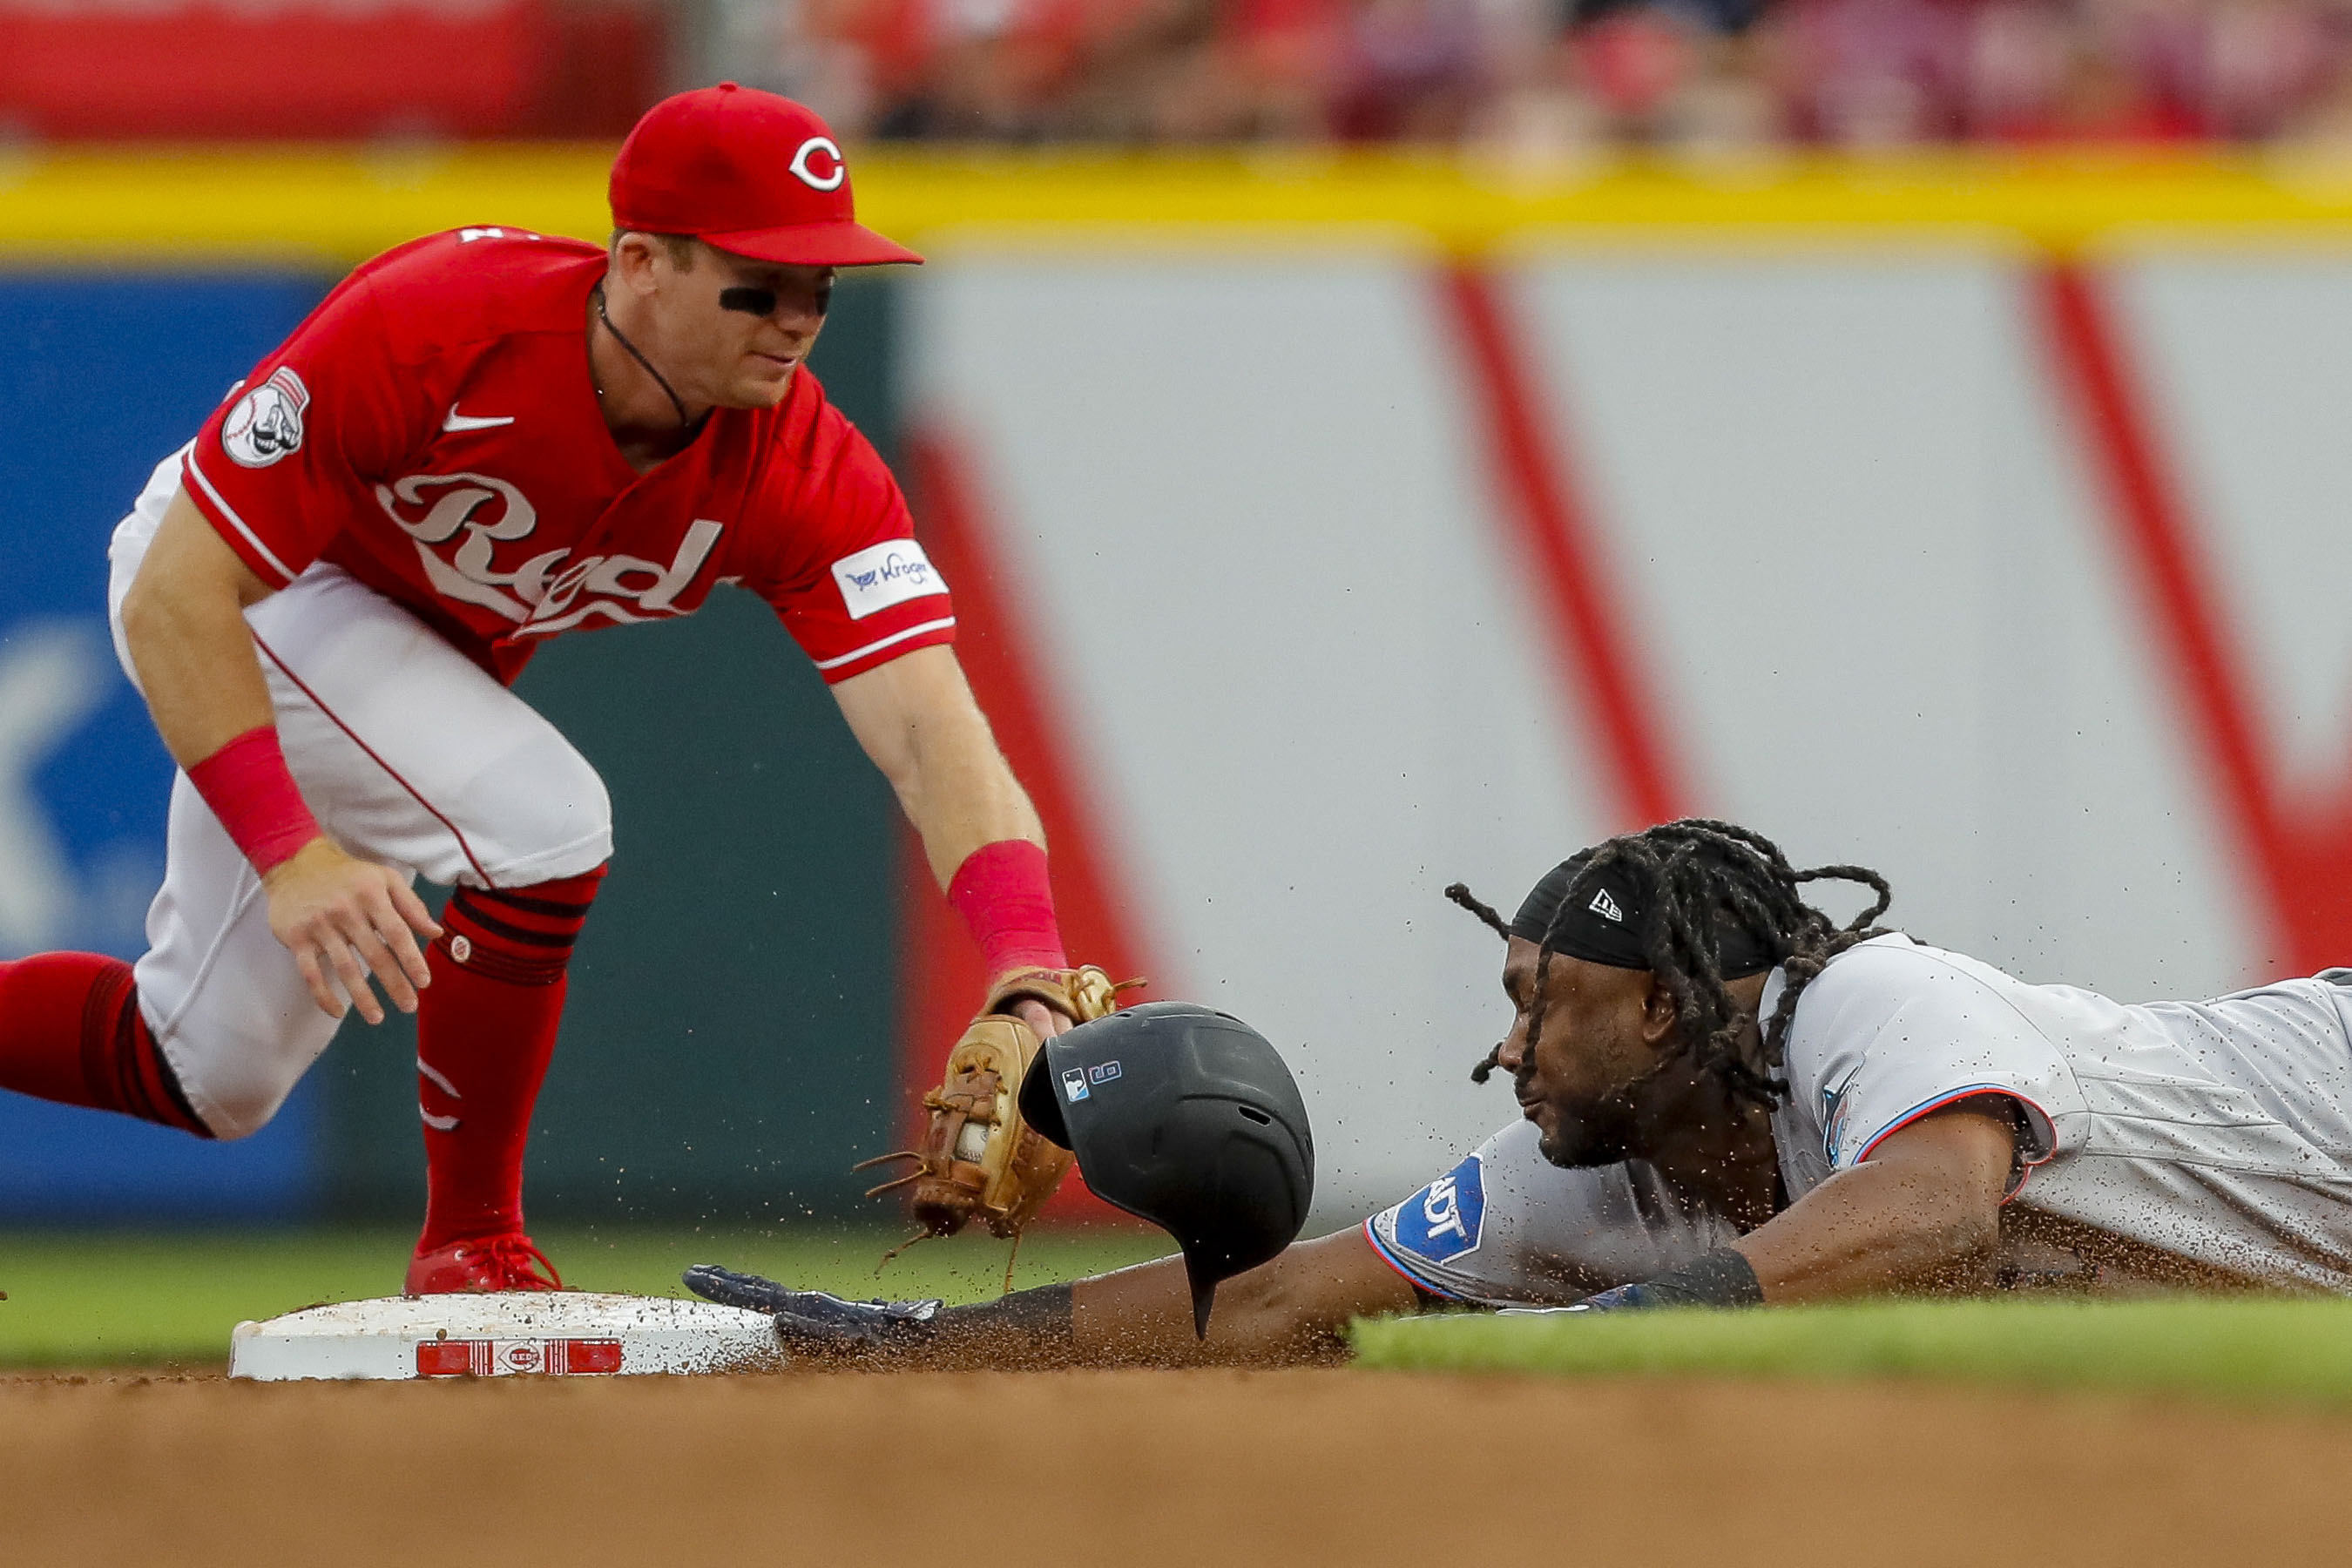 Jorge Soler's homer helps the Marlins rally for a 3-2 win over the Reds -  Record Herald